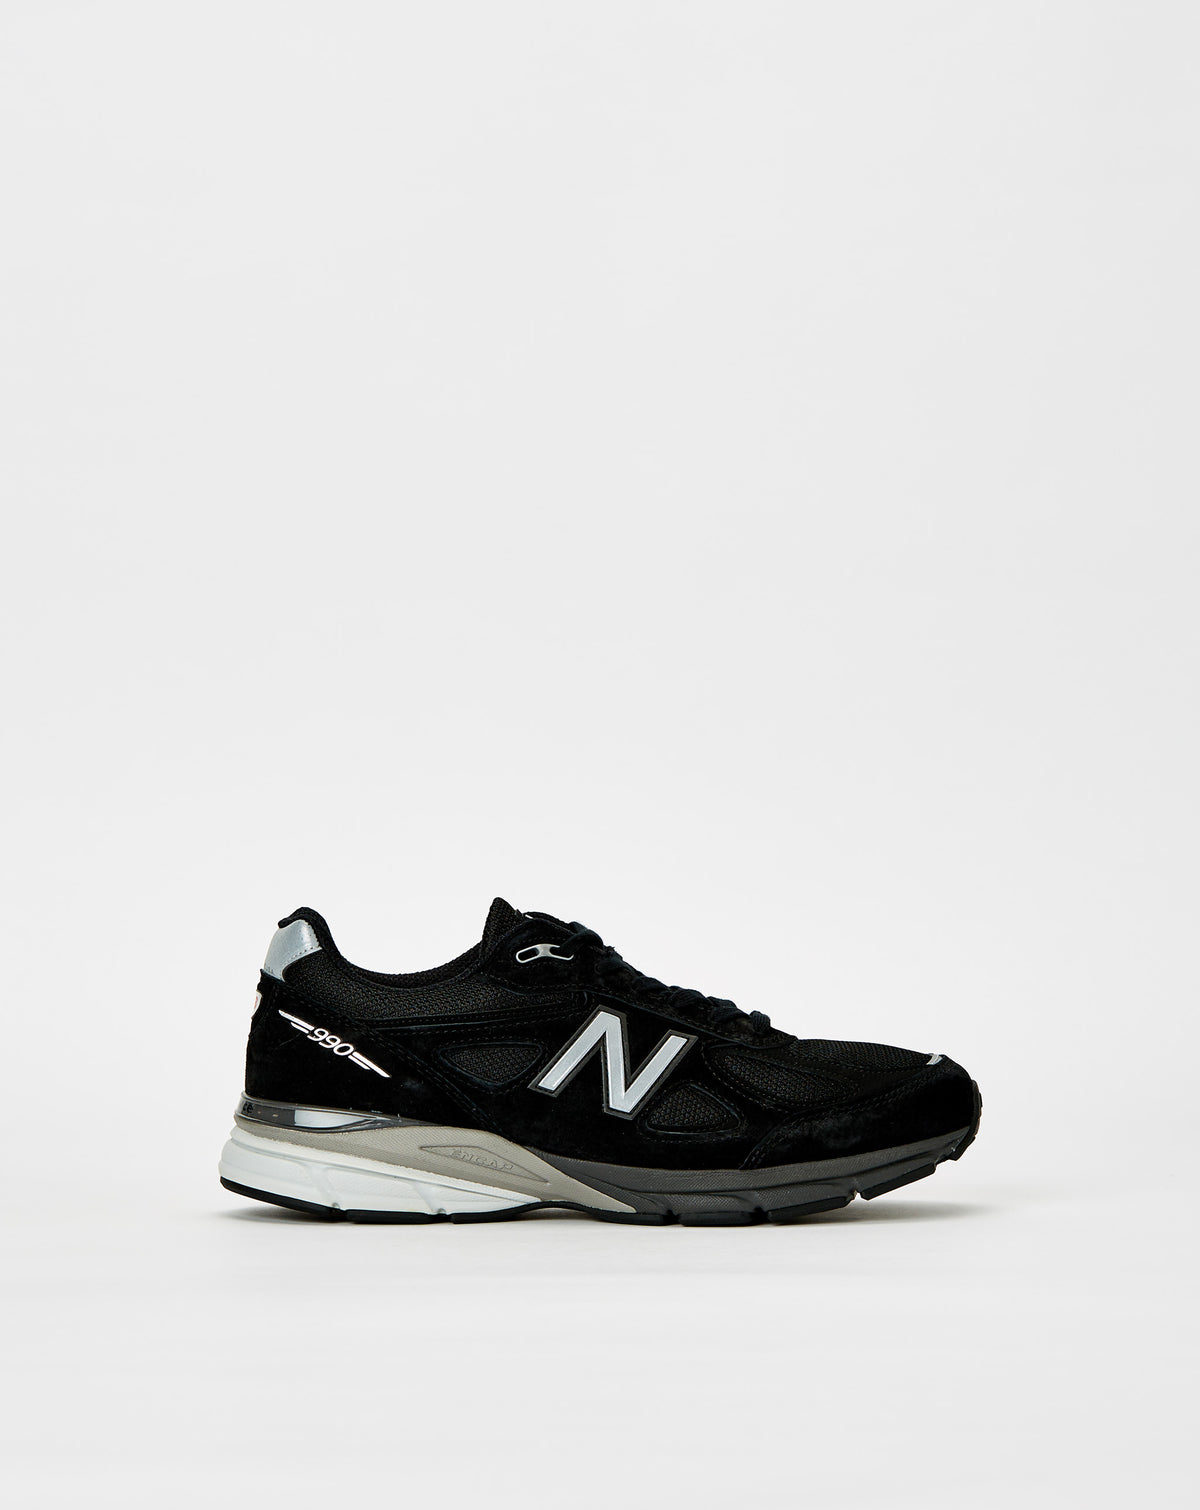 New Balance Made in USA 990v4 - Rule of Next Footwear